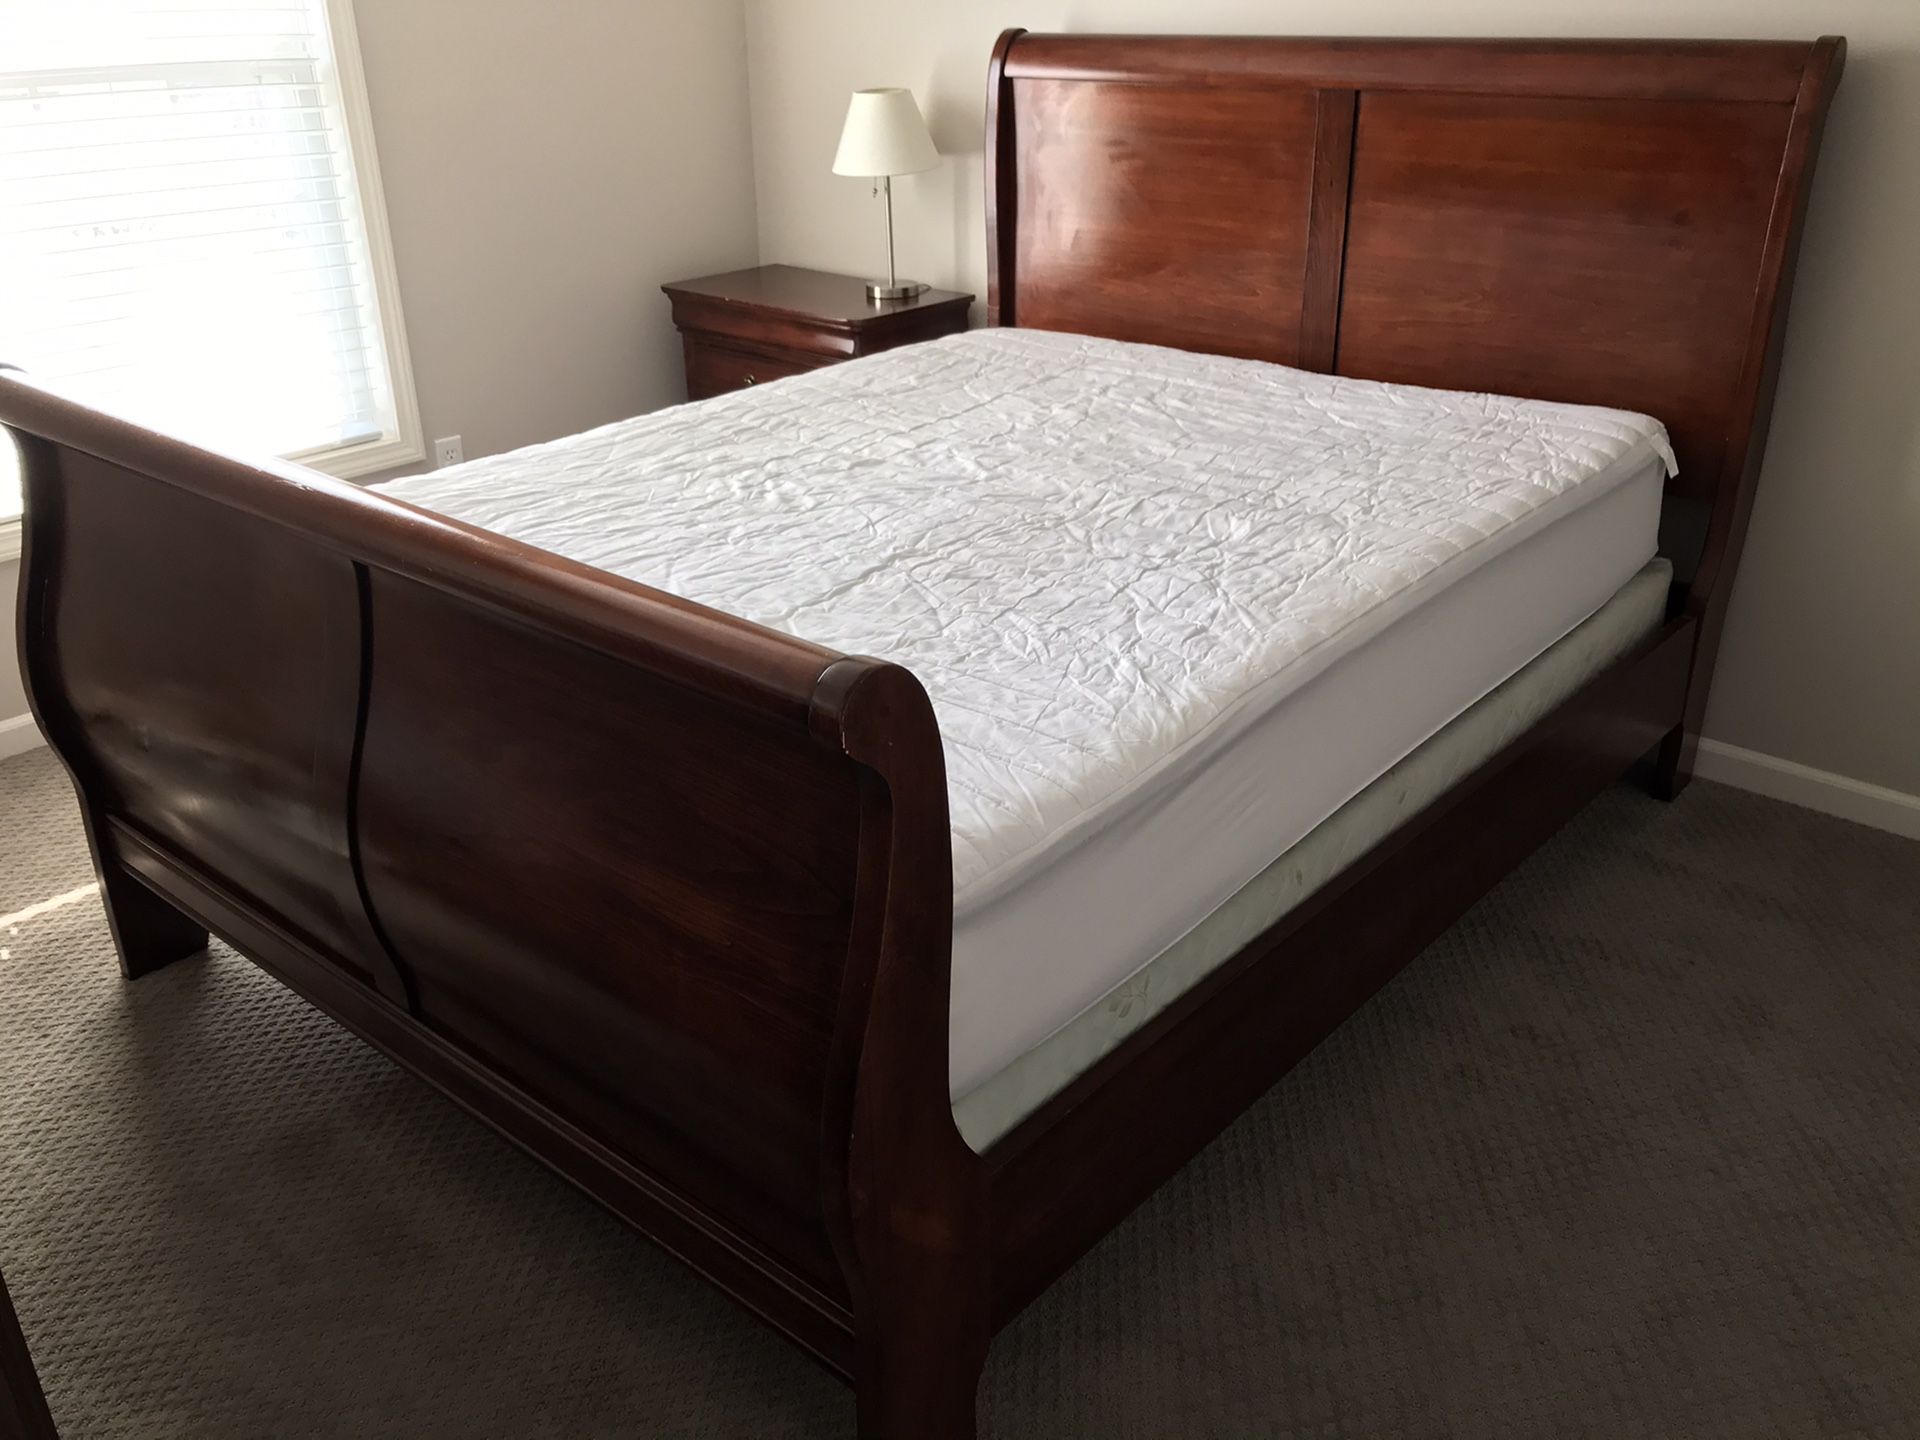 Queen bed frame and nightstand